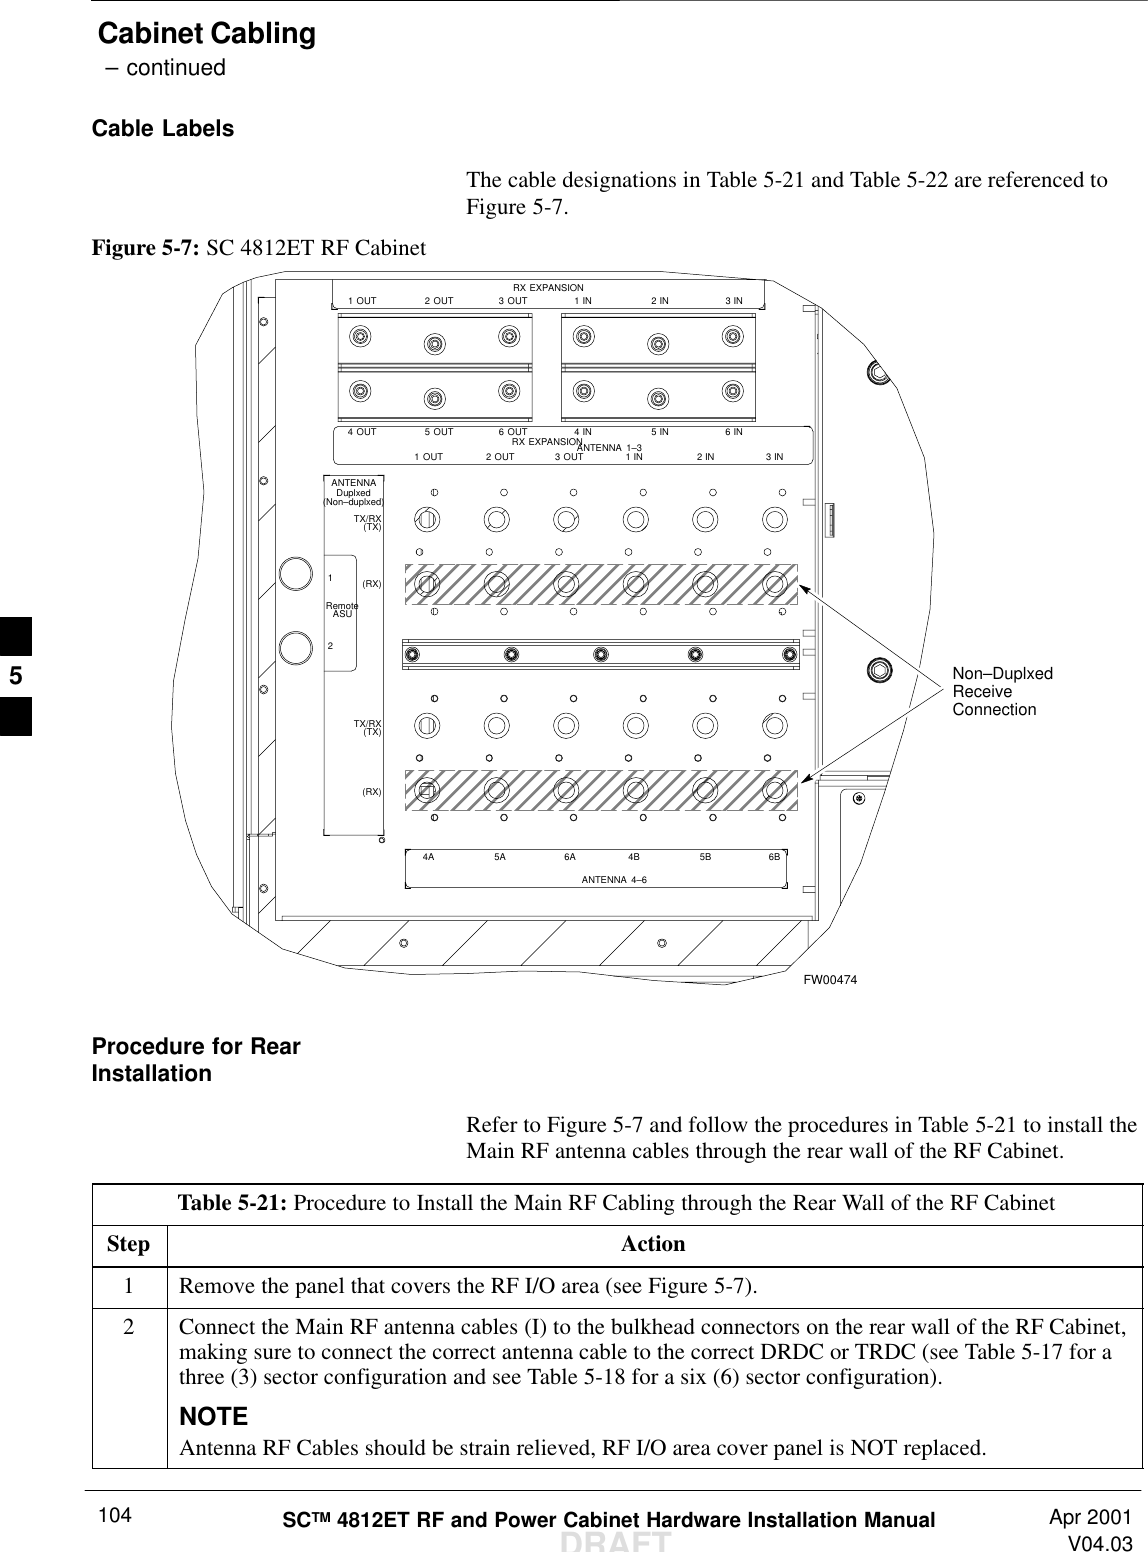 Cabinet Cabling – continuedDRAFTSCTM 4812ET RF and Power Cabinet Hardware Installation Manual Apr 2001V04.03104Cable LabelsThe cable designations in Table 5-21 and Table 5-22 are referenced toFigure 5-7.Figure 5-7: SC 4812ET RF CabinetFW004741 OUT 2 OUT 3 OUT 1 IN 2 IN 3 INRX EXPANSION1 OUT 2 OUT 3 OUT 1 IN 2 IN 3 INANTENNA 1–34 OUT 5 OUT 6 OUT 4 IN 5 IN 6 INRX EXPANSION4A 5A 4B 5B 6BANTENNA 4–66ARemoteASU12TX/RX(TX)(RX)TX/RX(TX)(RX)ANTENNADuplxed(Non–duplxed)Non–DuplxedReceiveConnectionProcedure for RearInstallationRefer to Figure 5-7 and follow the procedures in Table 5-21 to install theMain RF antenna cables through the rear wall of the RF Cabinet.Table 5-21: Procedure to Install the Main RF Cabling through the Rear Wall of the RF CabinetStep Action1Remove the panel that covers the RF I/O area (see Figure 5-7).2Connect the Main RF antenna cables (I) to the bulkhead connectors on the rear wall of the RF Cabinet,making sure to connect the correct antenna cable to the correct DRDC or TRDC (see Table 5-17 for athree (3) sector configuration and see Table 5-18 for a six (6) sector configuration).NOTEAntenna RF Cables should be strain relieved, RF I/O area cover panel is NOT replaced.5